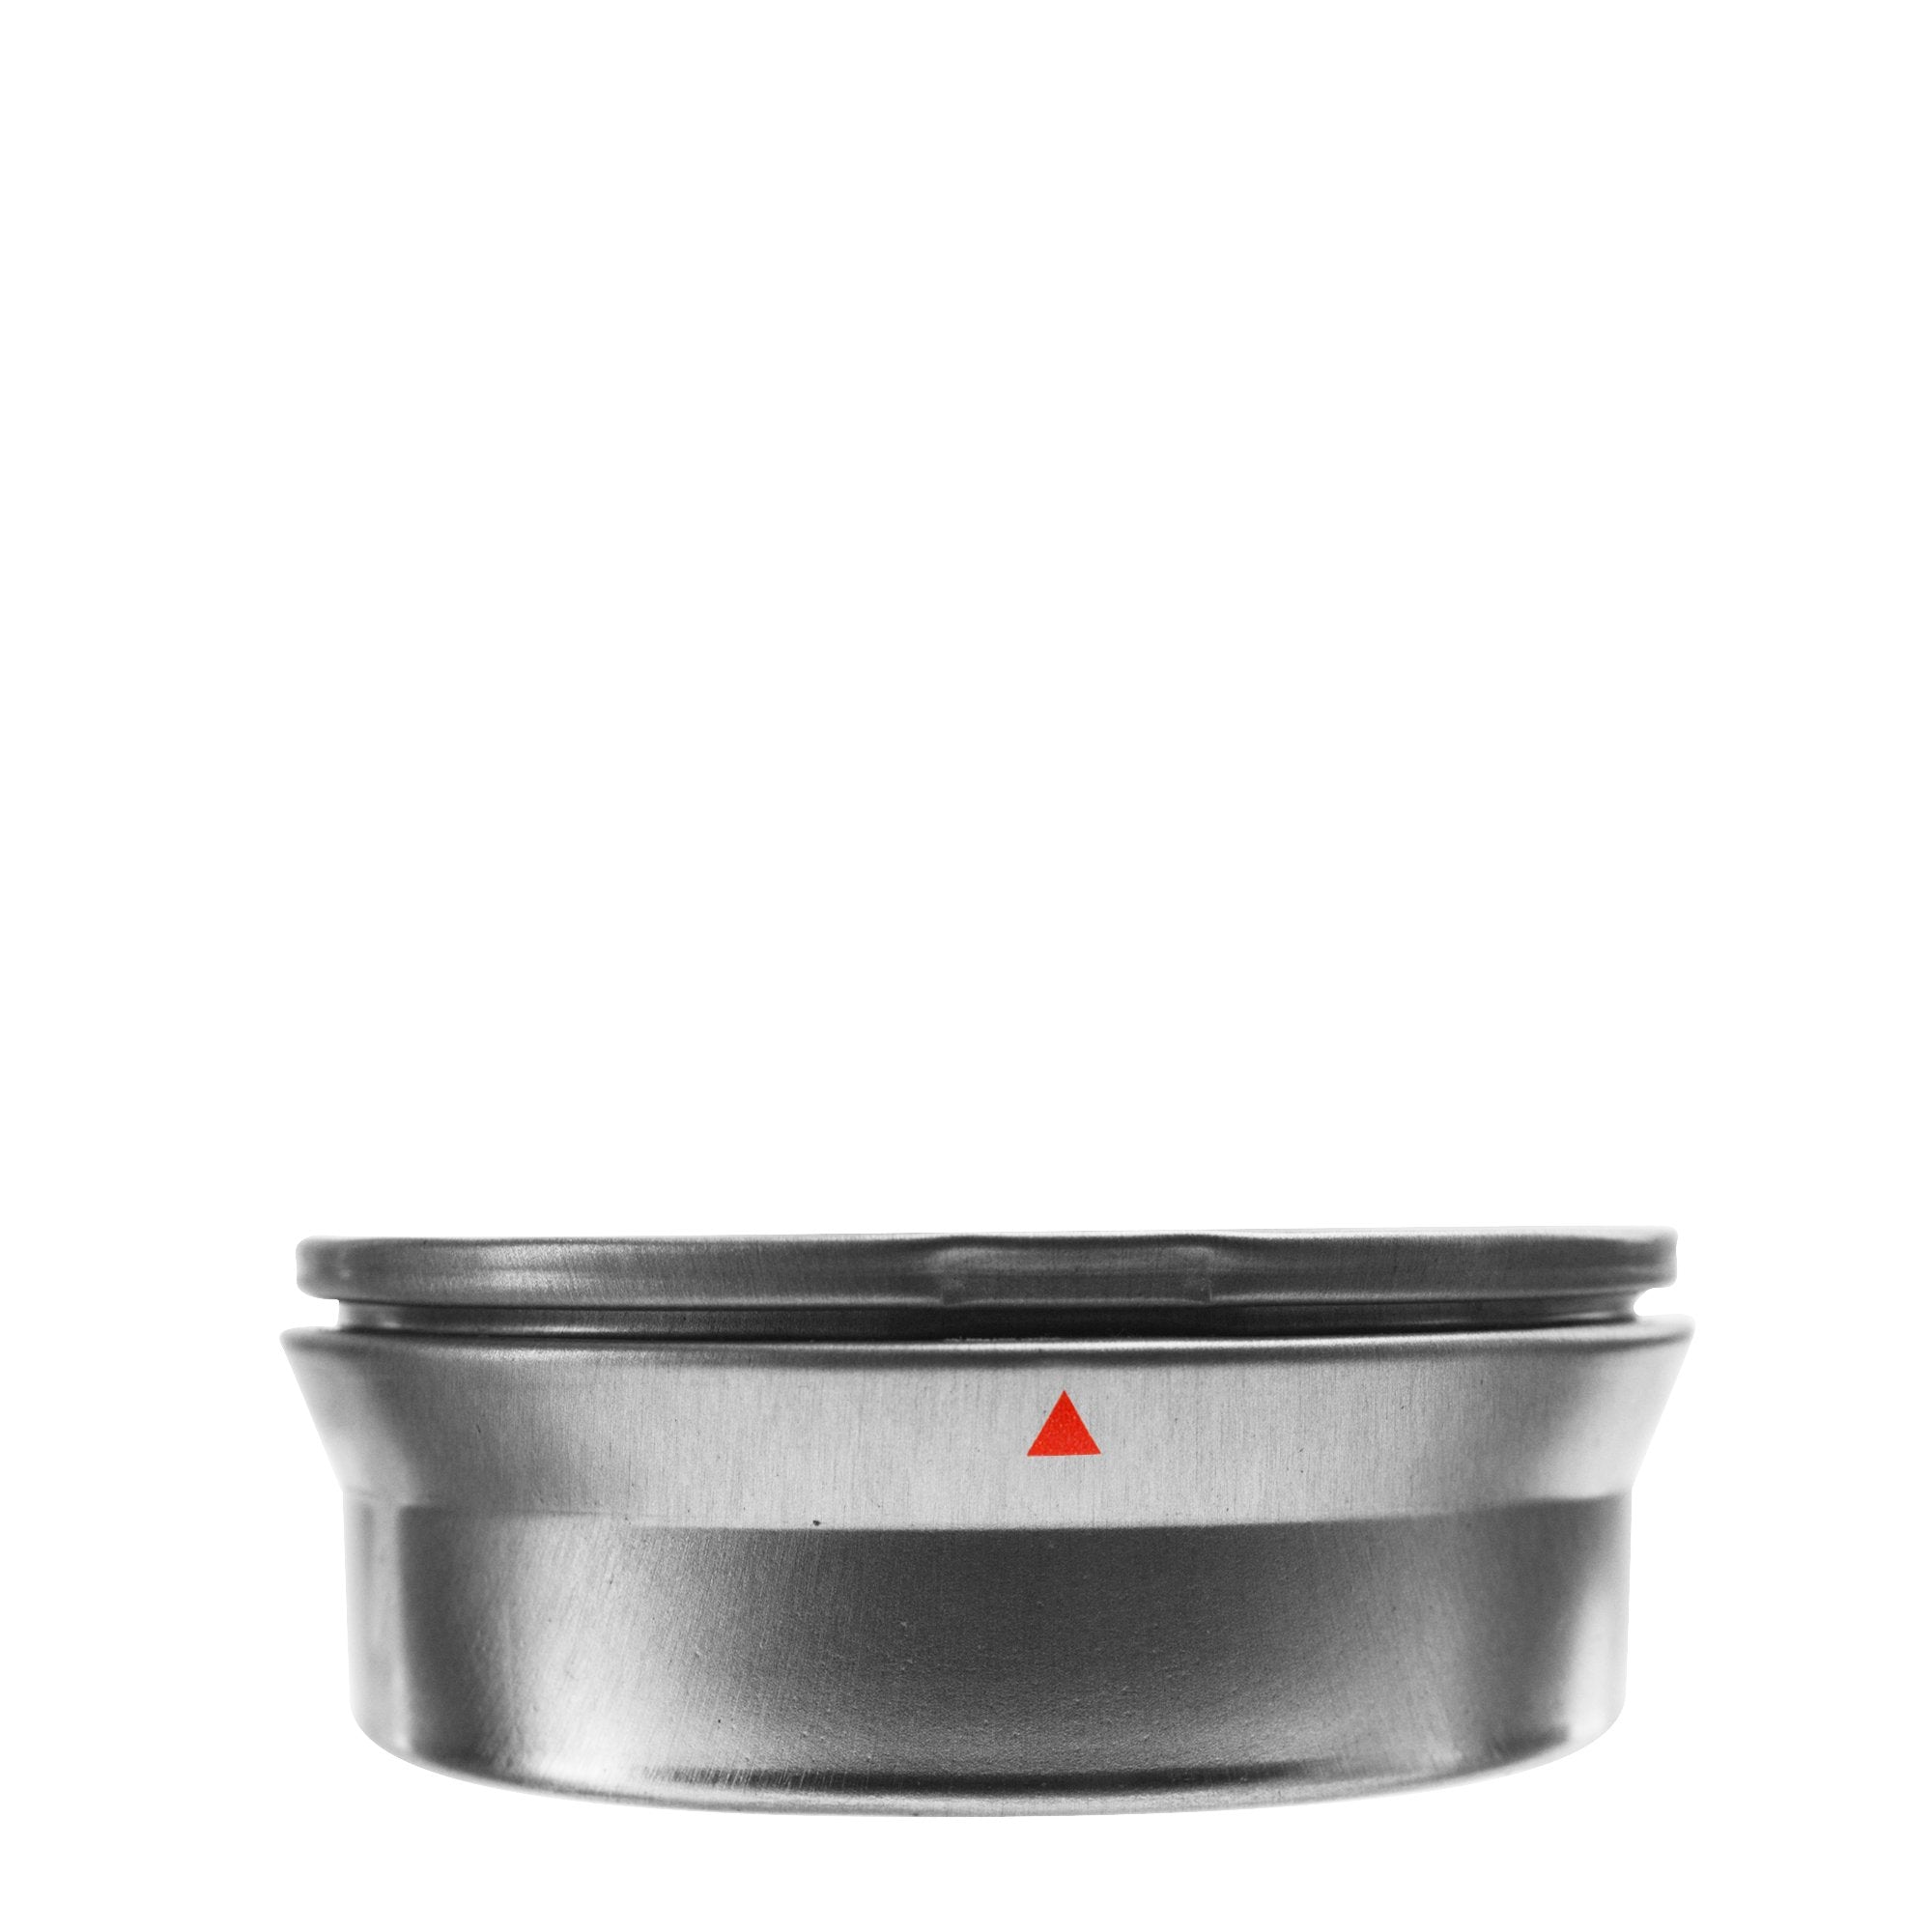 Sample Child Resistant | Safely Lock Sentinel Tin with Cap | Small and Medium - Brushed Metal - 4